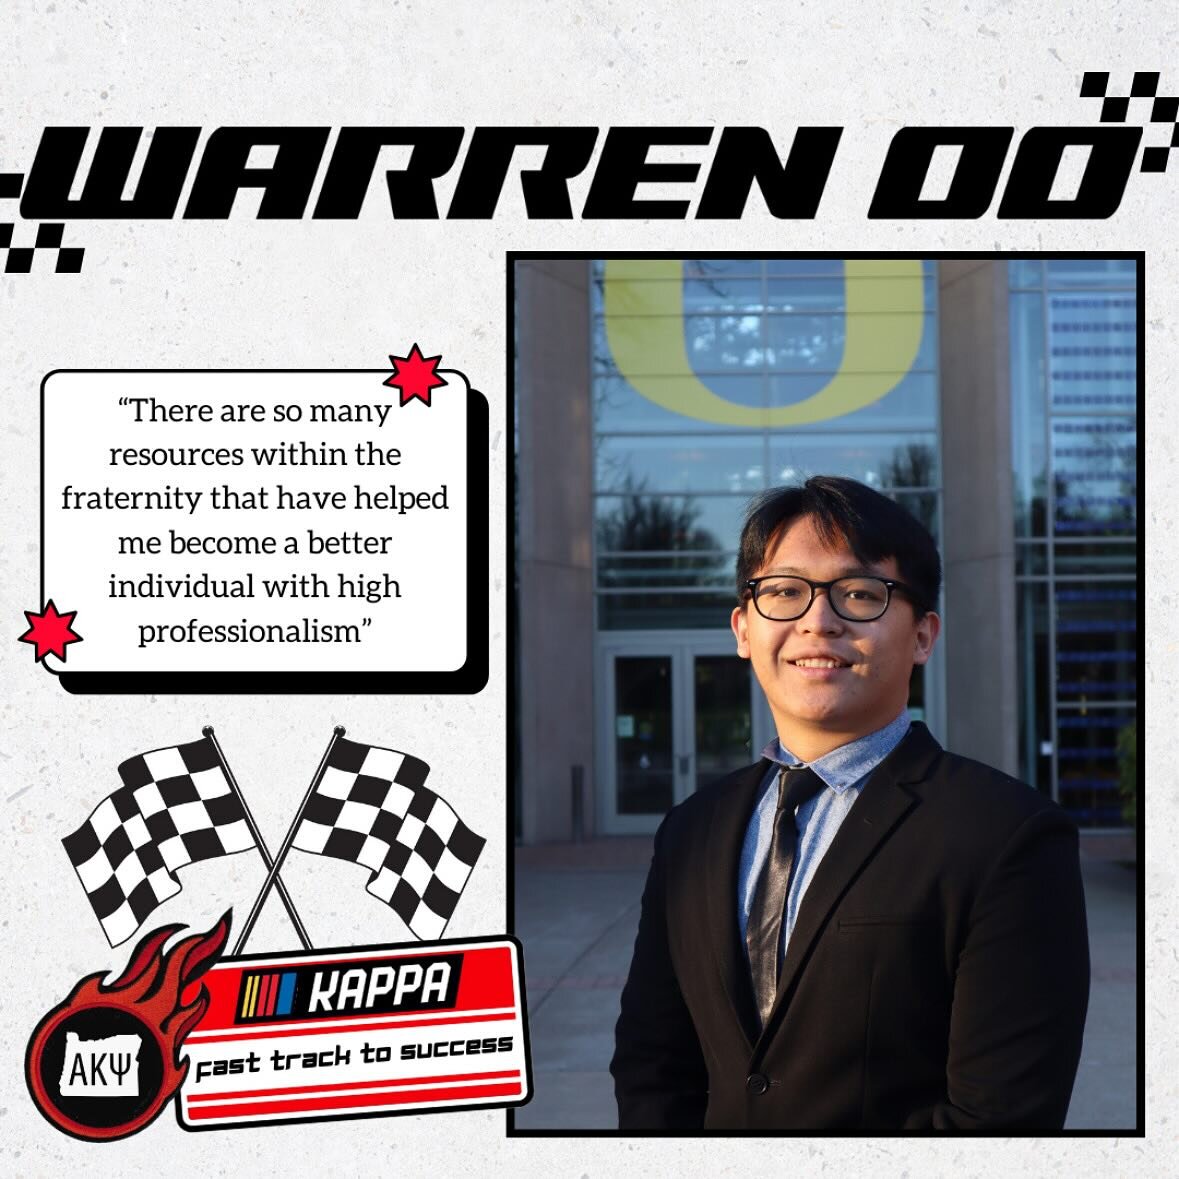 Meet Warren Oo, a member of Kappa Chapter! Swipe to hear about one of his favorite experiences he found through the fraternity! 

Reminder: Only two more rush events remain! We hope to see you at our Pro-D event and Meet the Members happening this we